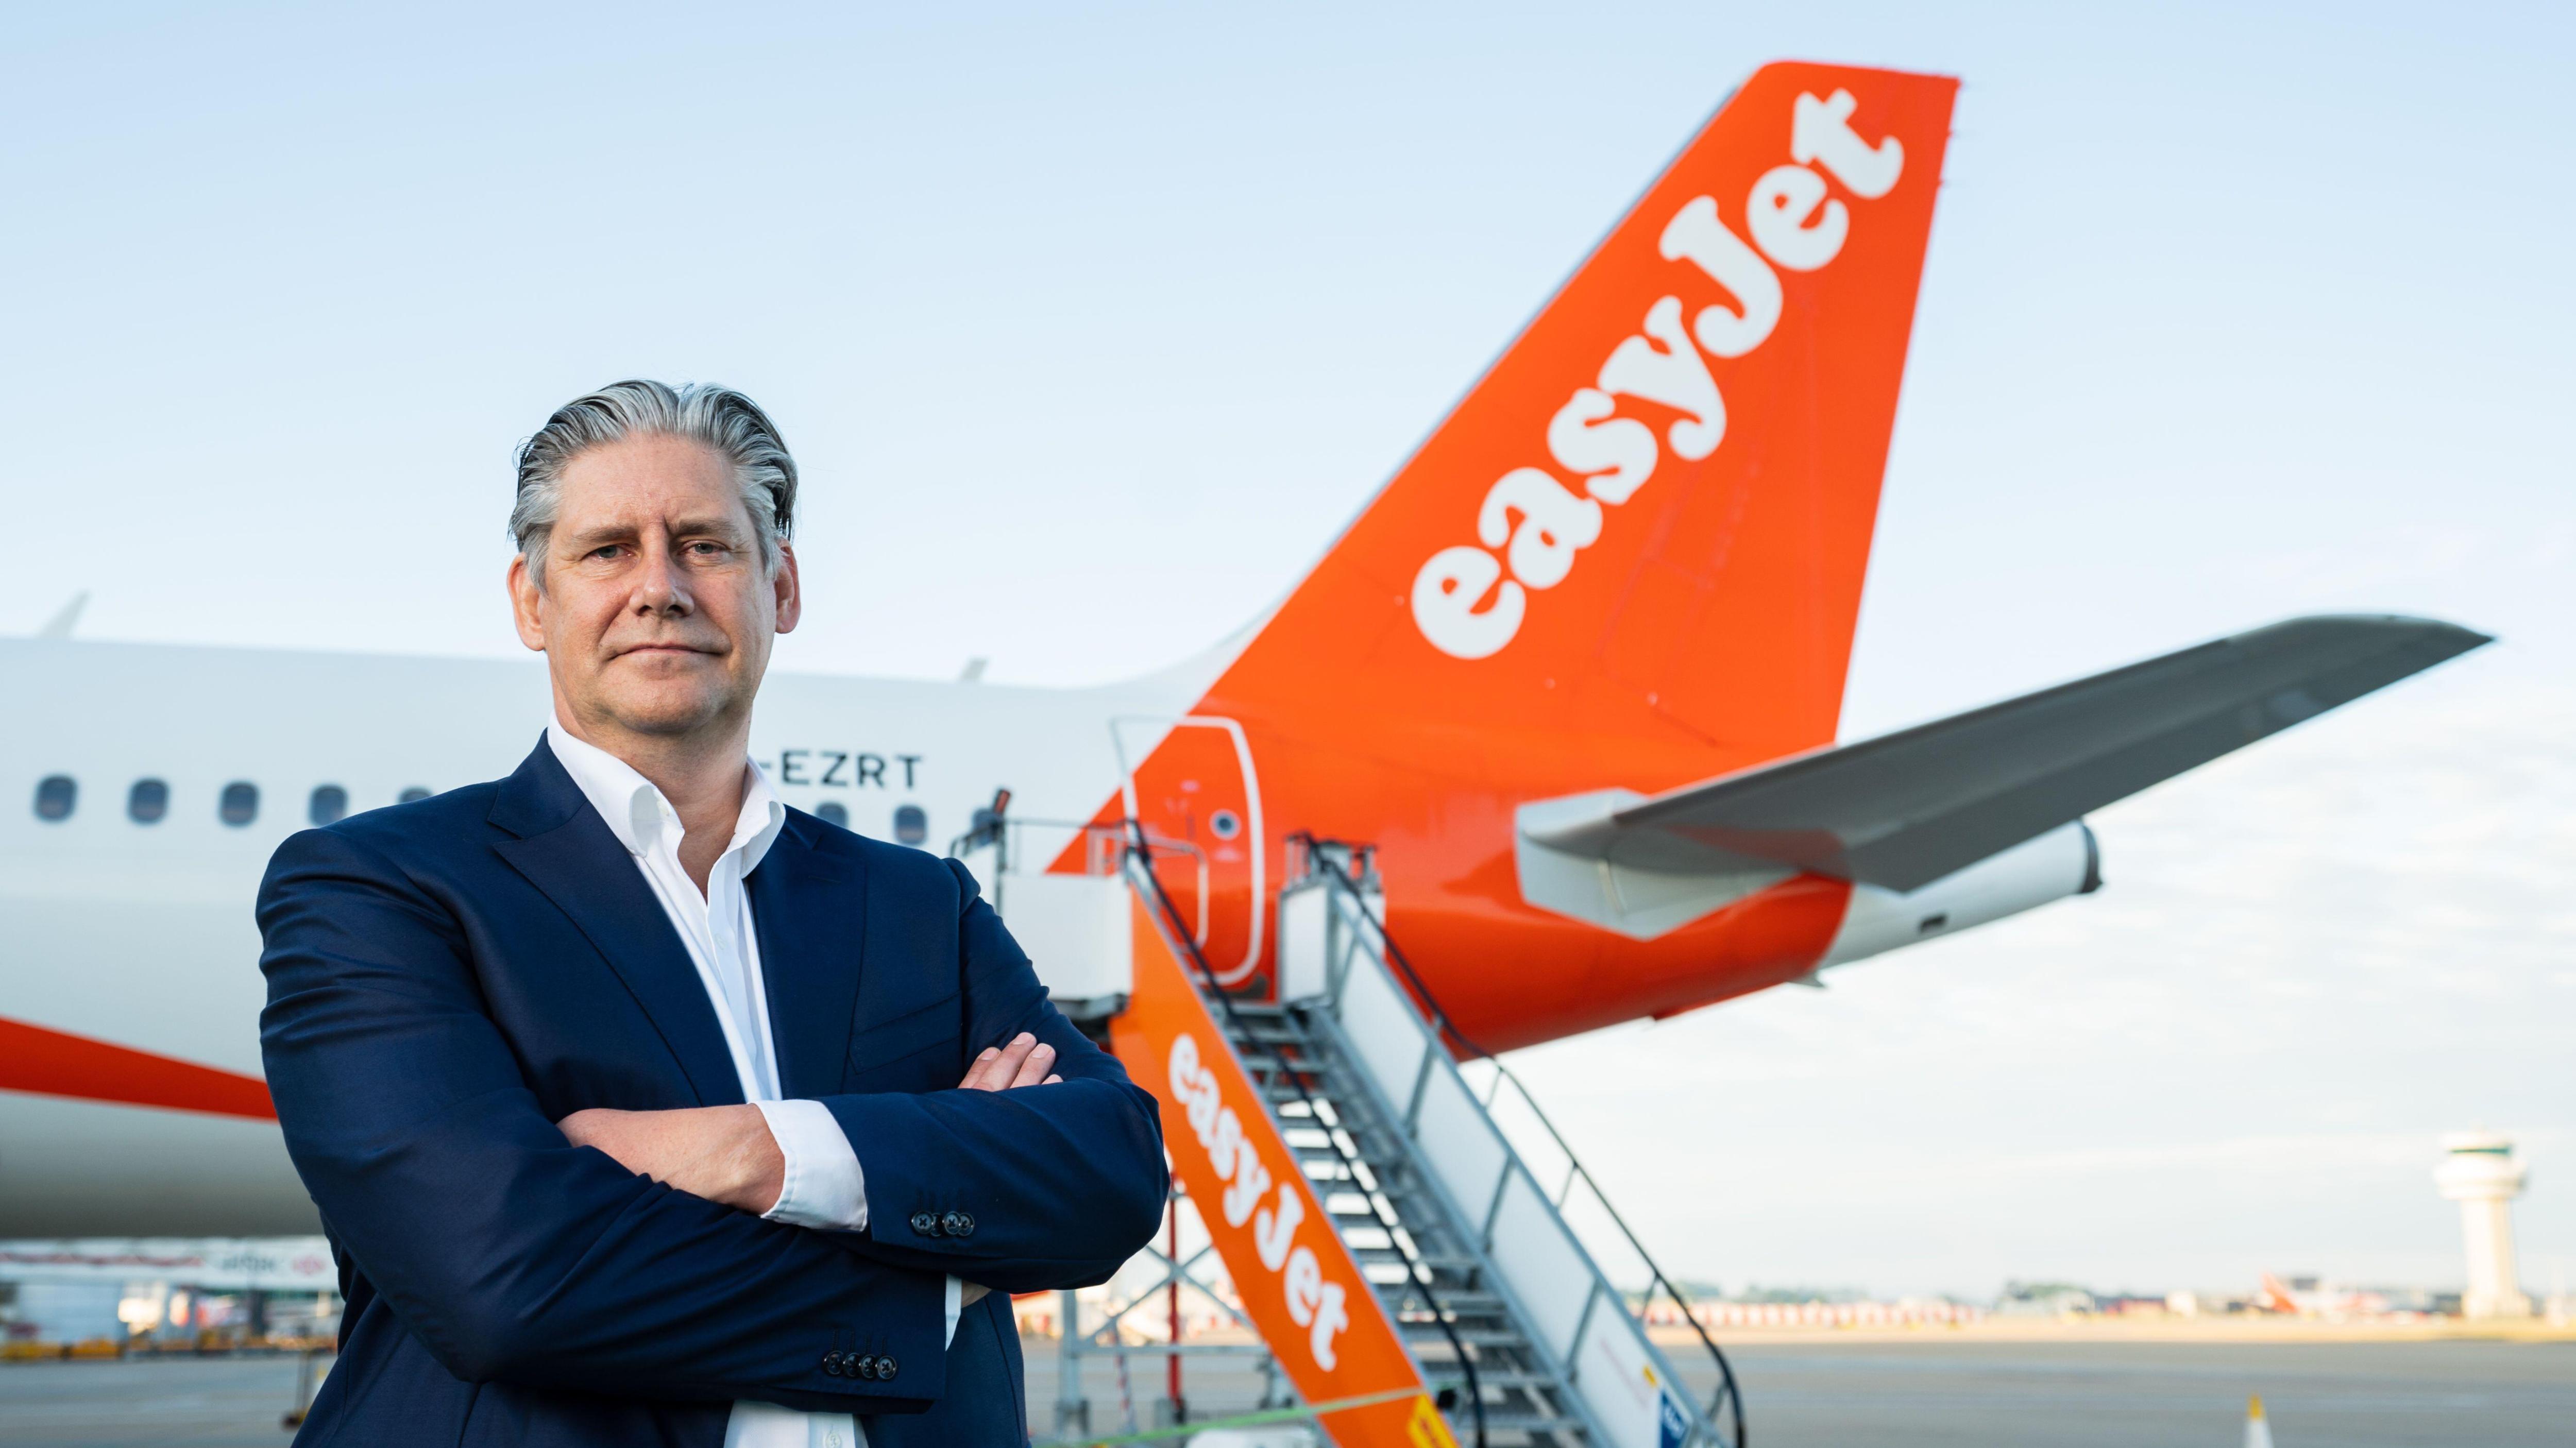 Johan Lundgren has presided over a turbulent time for the budget airline but it is now back on track, helped by the success of easyJet Holidays